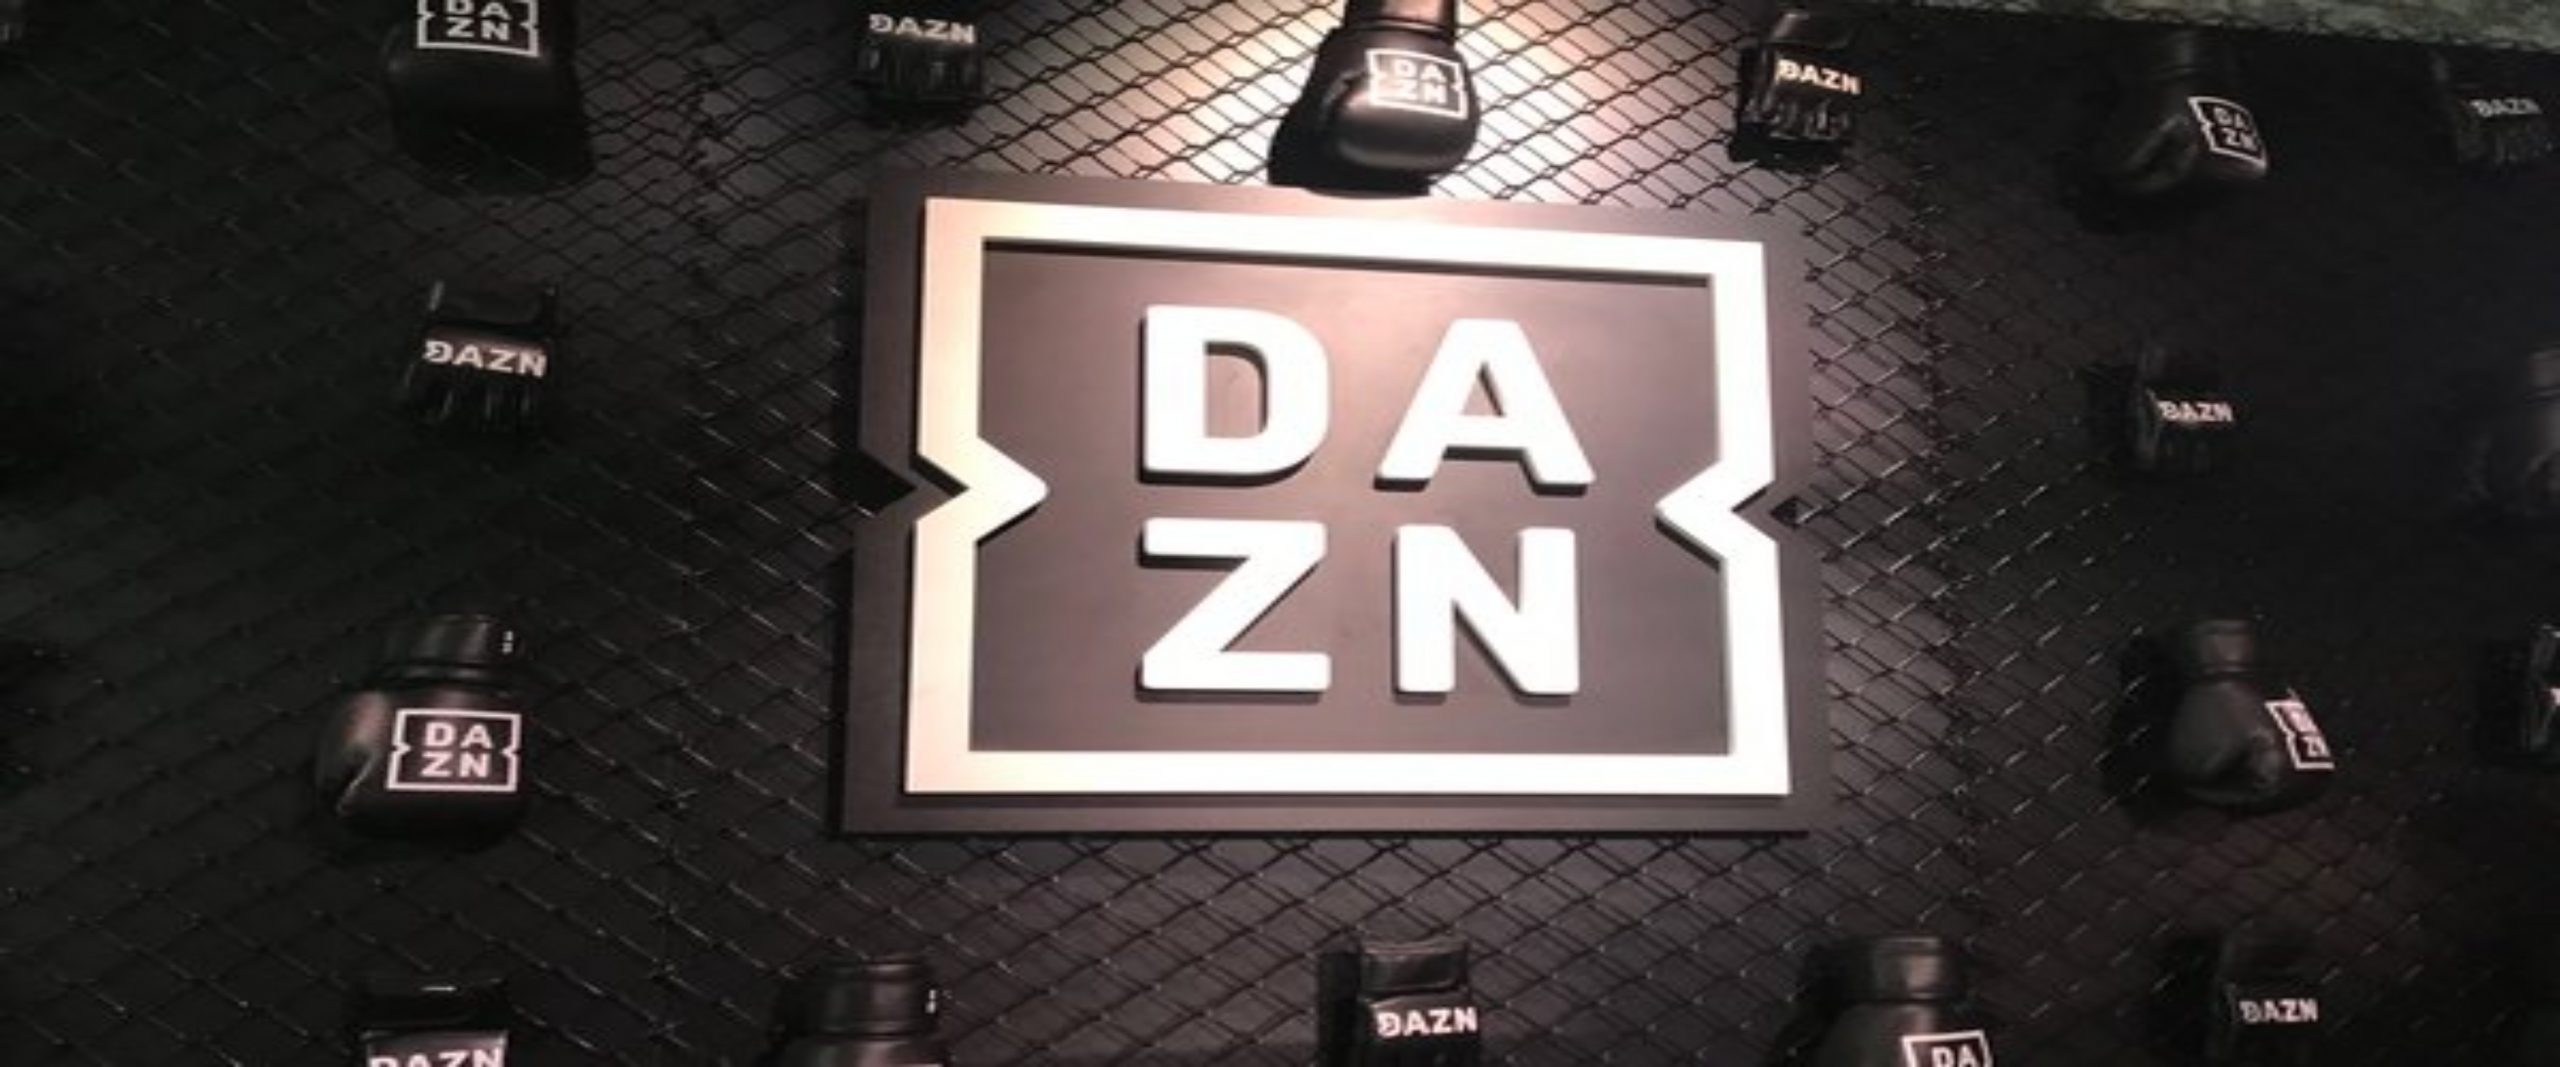 DAZN announces launch of global sports OTT play in 200 countries by December 1 - Inside Sport India